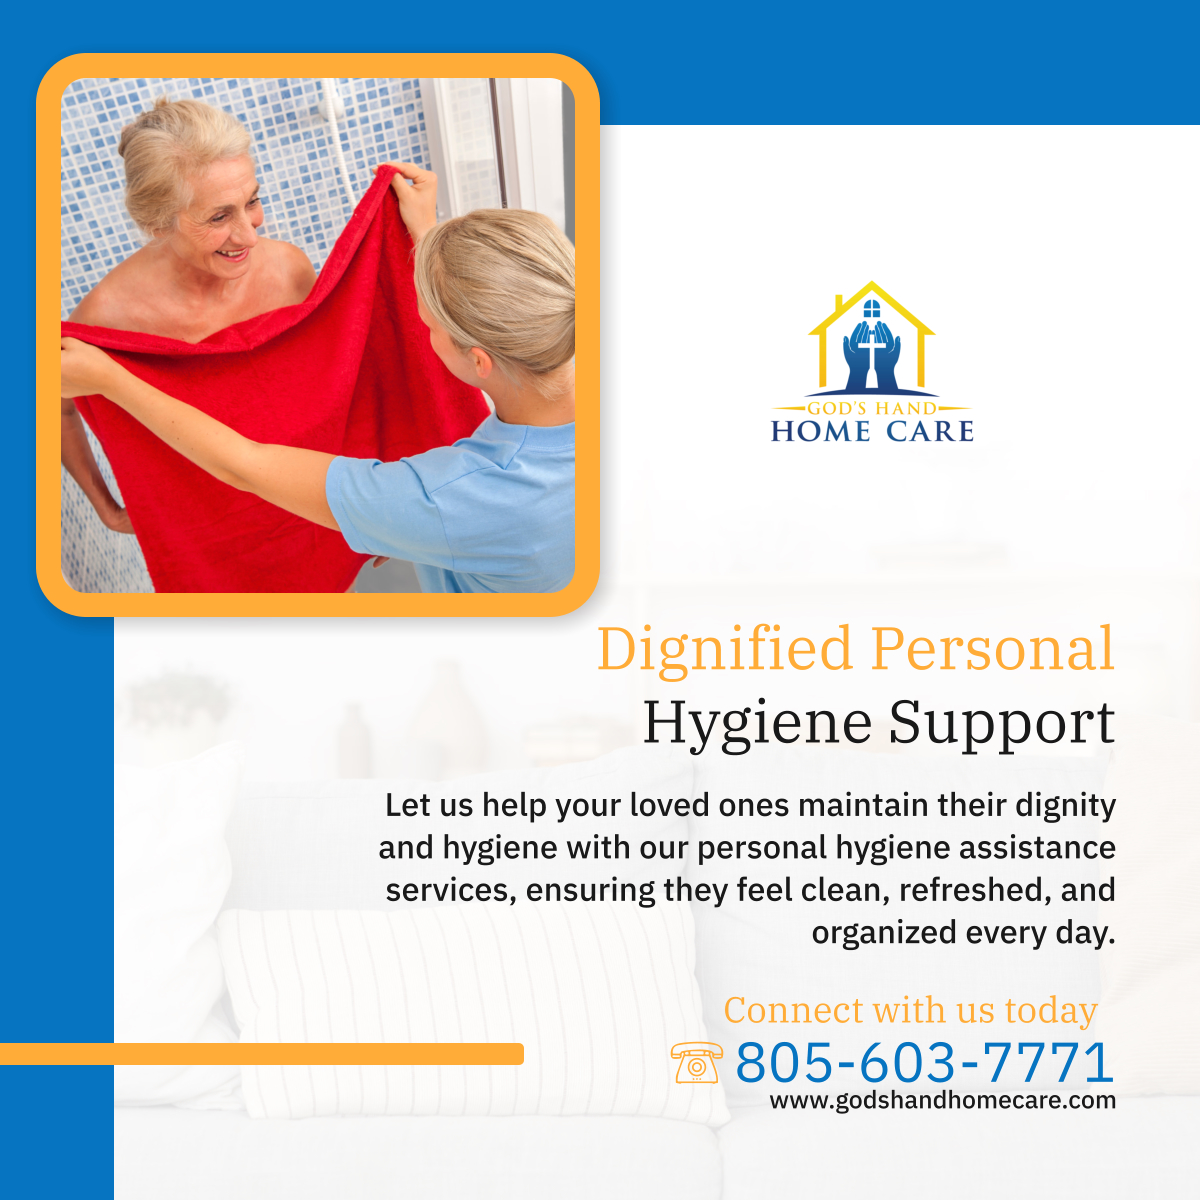 Our caregivers provide compassionate assistance with bathing, grooming, dental hygiene, and more, ensuring your loved ones maintain their personal hygiene with dignity and comfort. 

#OxnardCA #HomeCare #PersonalCare